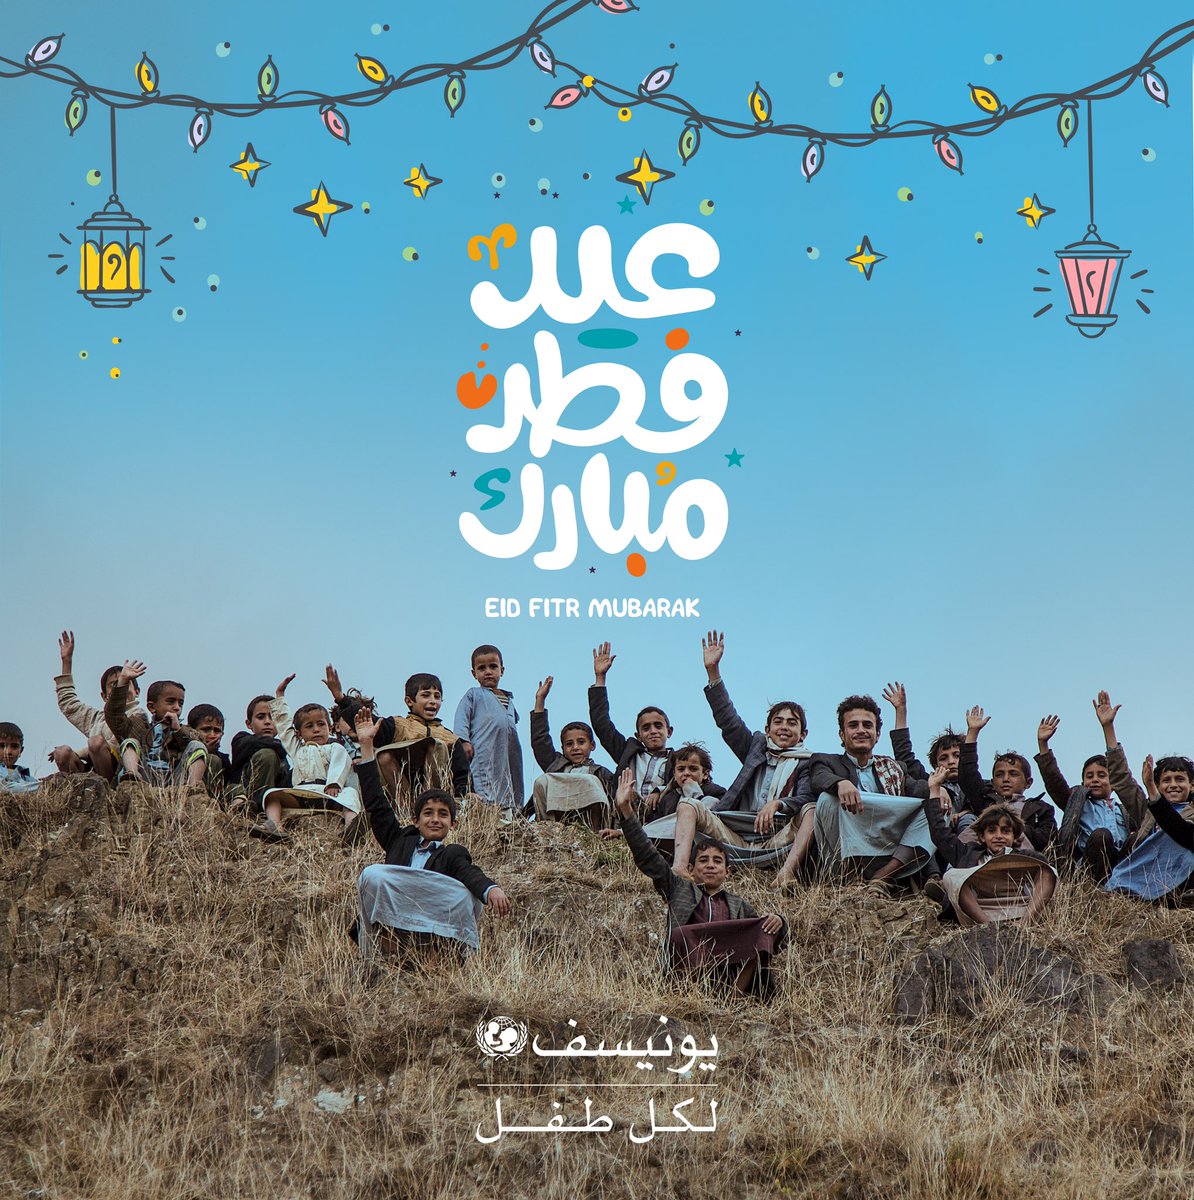 We wish Yemeni children Eid Mubarak! Despite the challenges, your courage inspires us. Let's create a brighter future #ForEveryChild in Yemen. Wishing you all a blessed and joyful Eid!